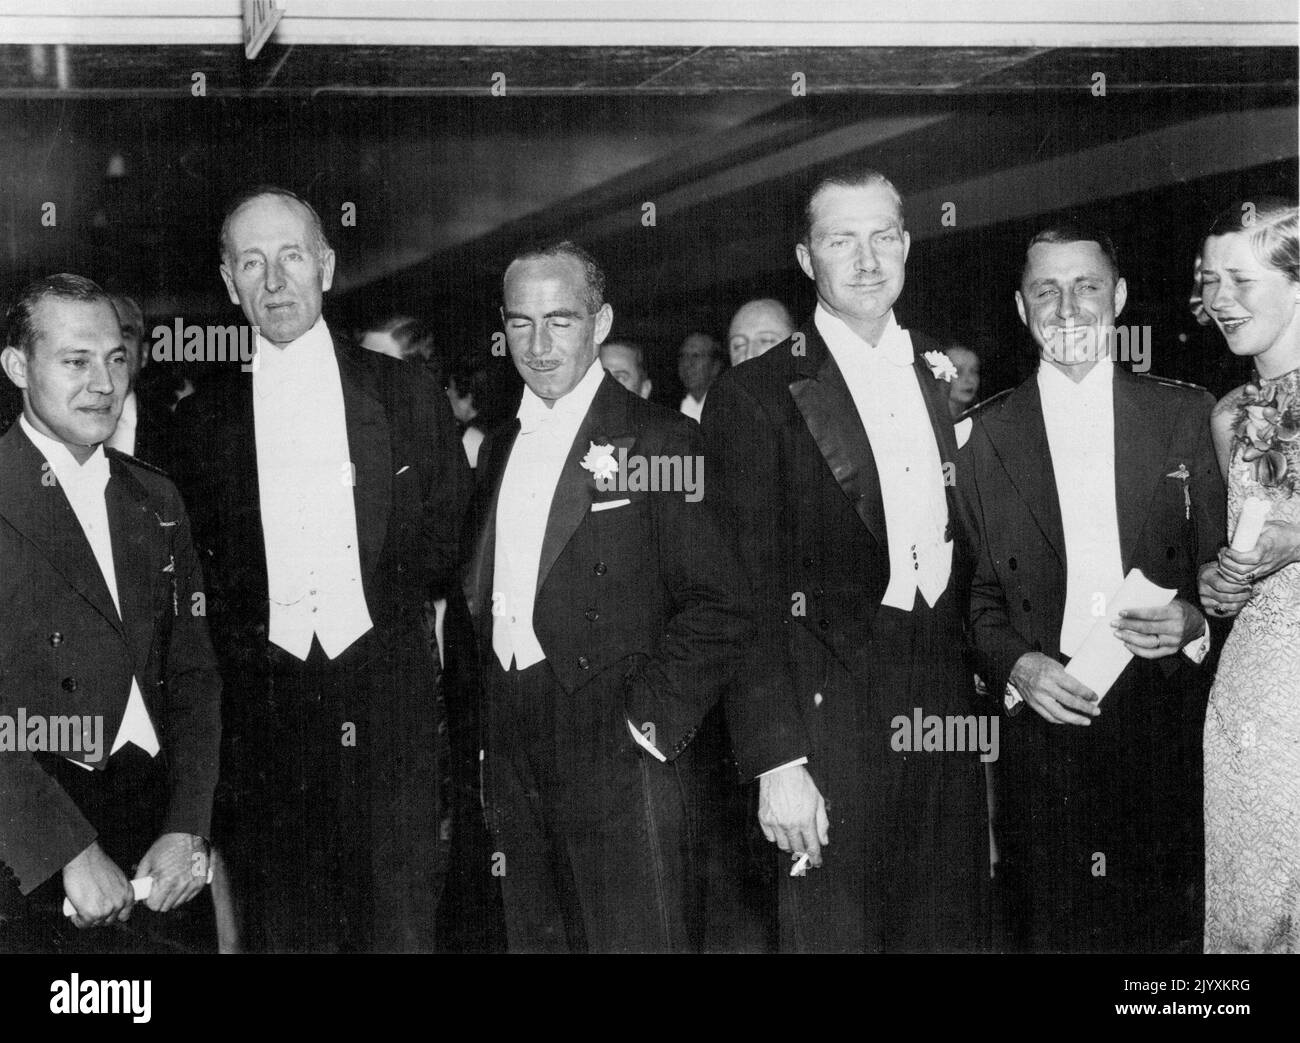 Banquet To Air Race Winners - Mr. C.W.A. Scott and Mr. T. Campbell Black, second and third from right at the Royal Aero Club Dinner given in their honour in London last night. With them in group are K.D.Parmentier and J.J. Moll, the Dutch airmen (extreme left and right) with Lord Londonderry second from left. January 5, 1935. Stock Photo